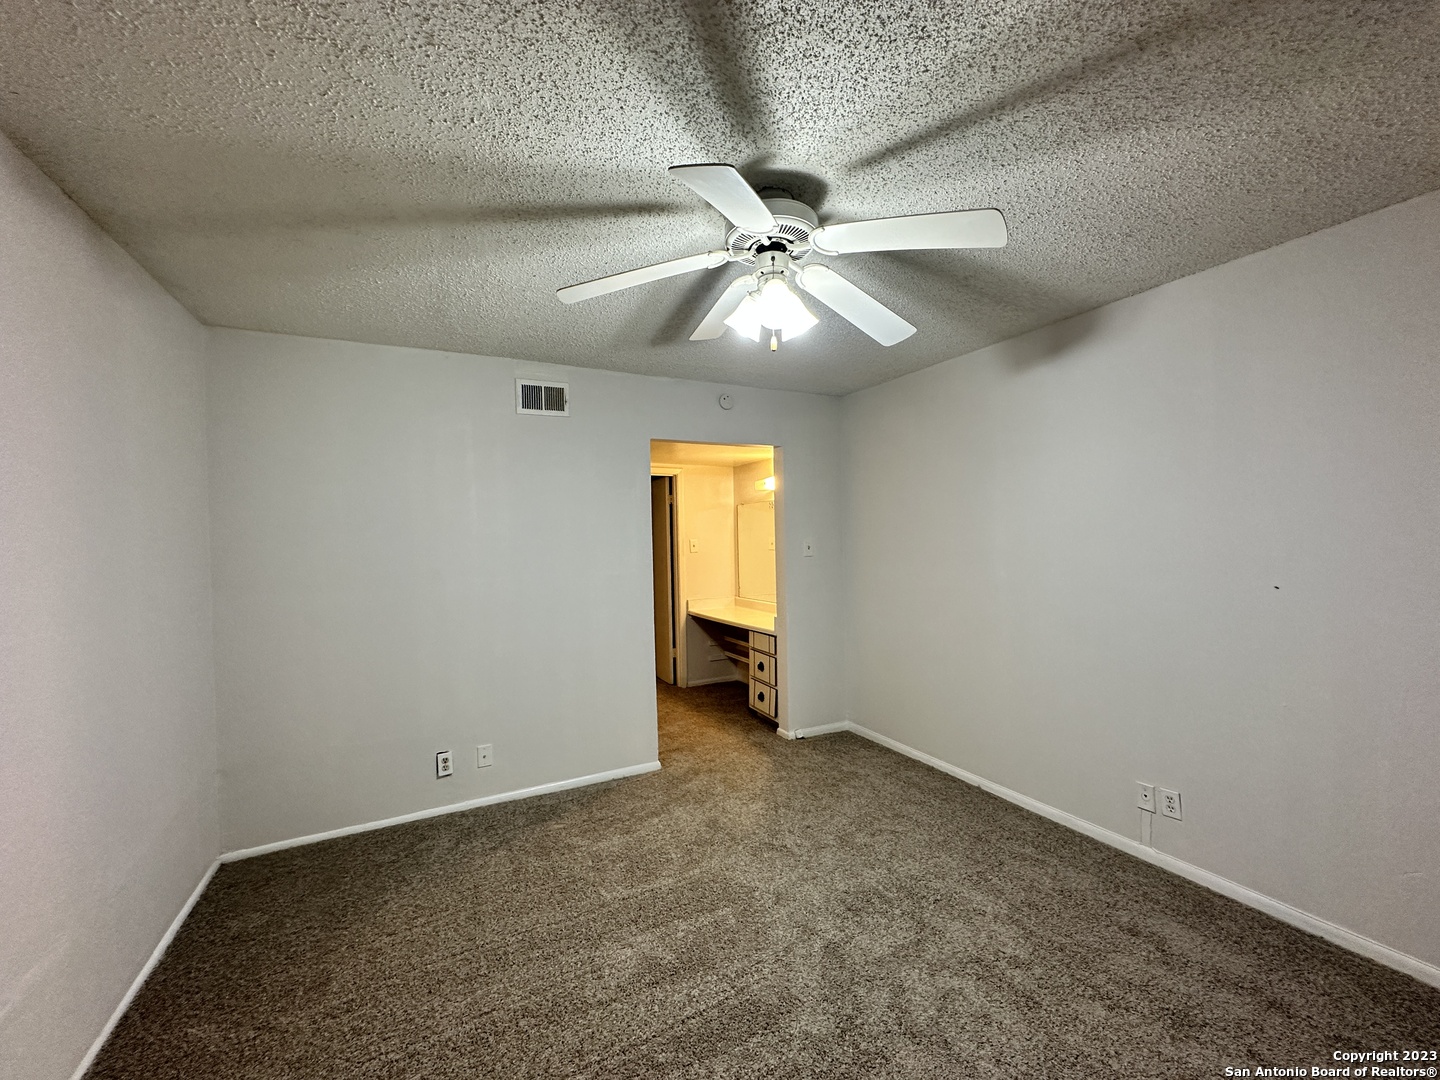 an empty room with a ceiling fan and wooden floor